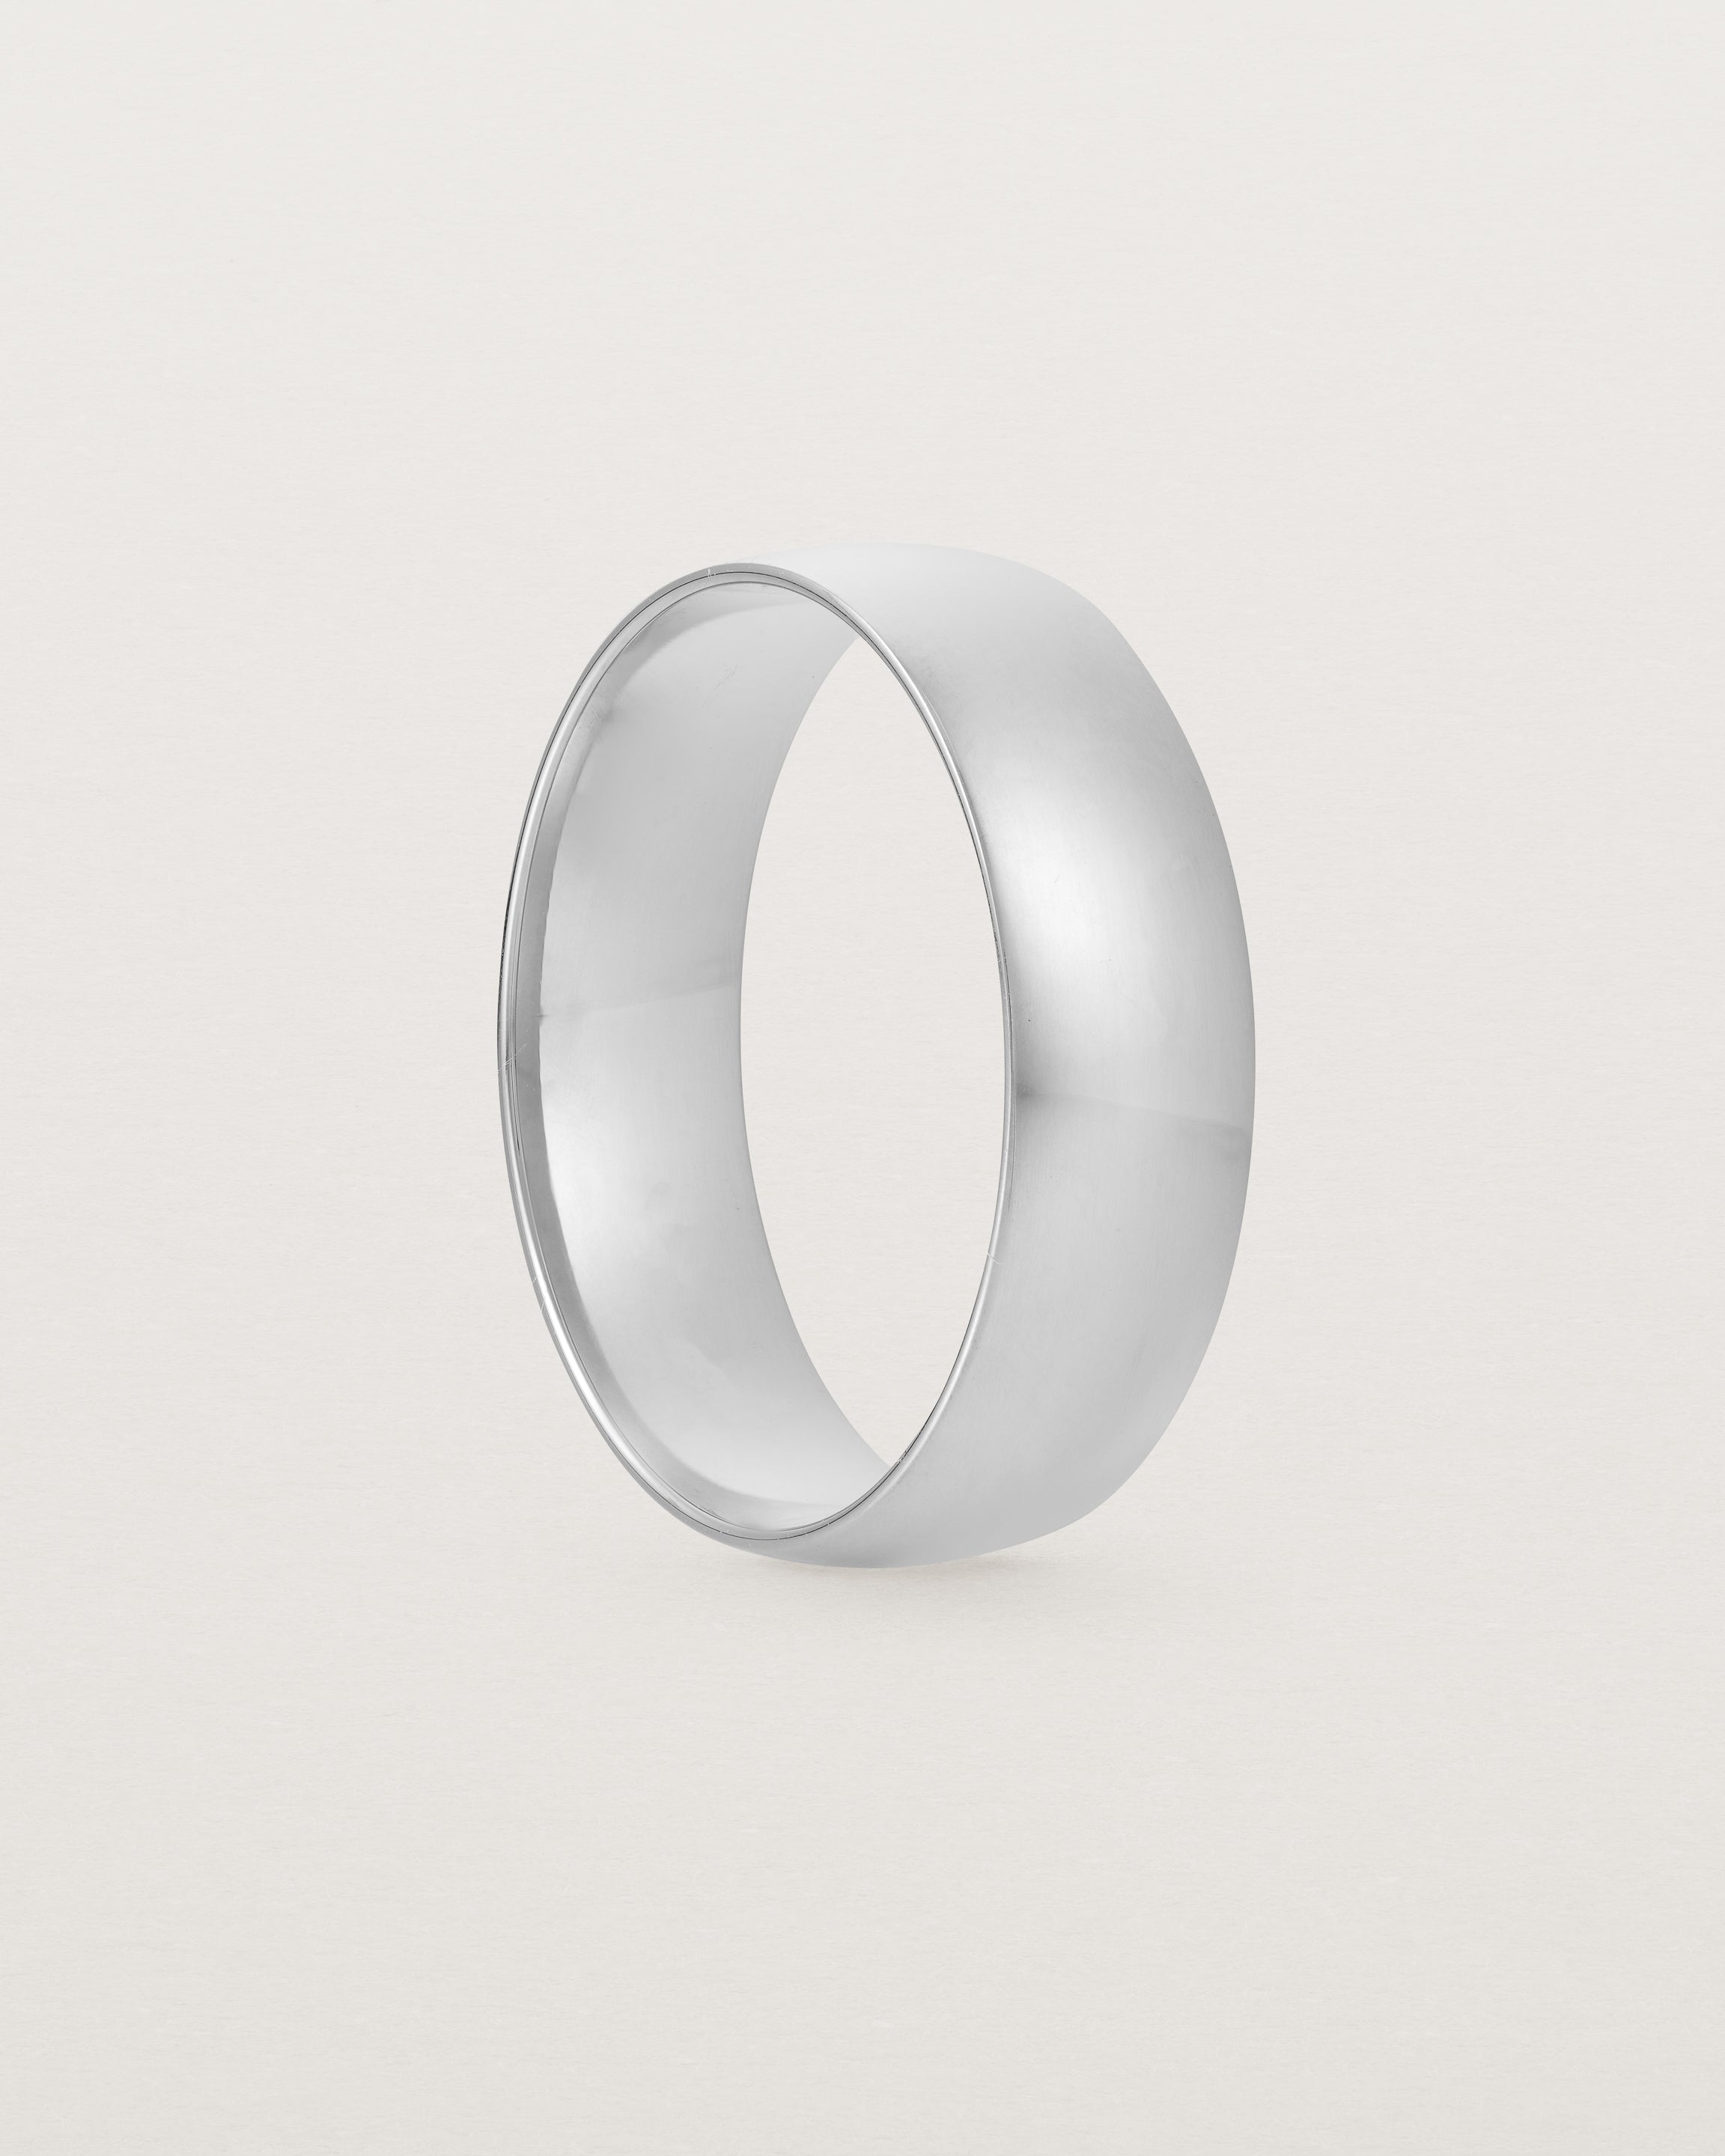 A bold 6mm wedding band crafted in sterling silver